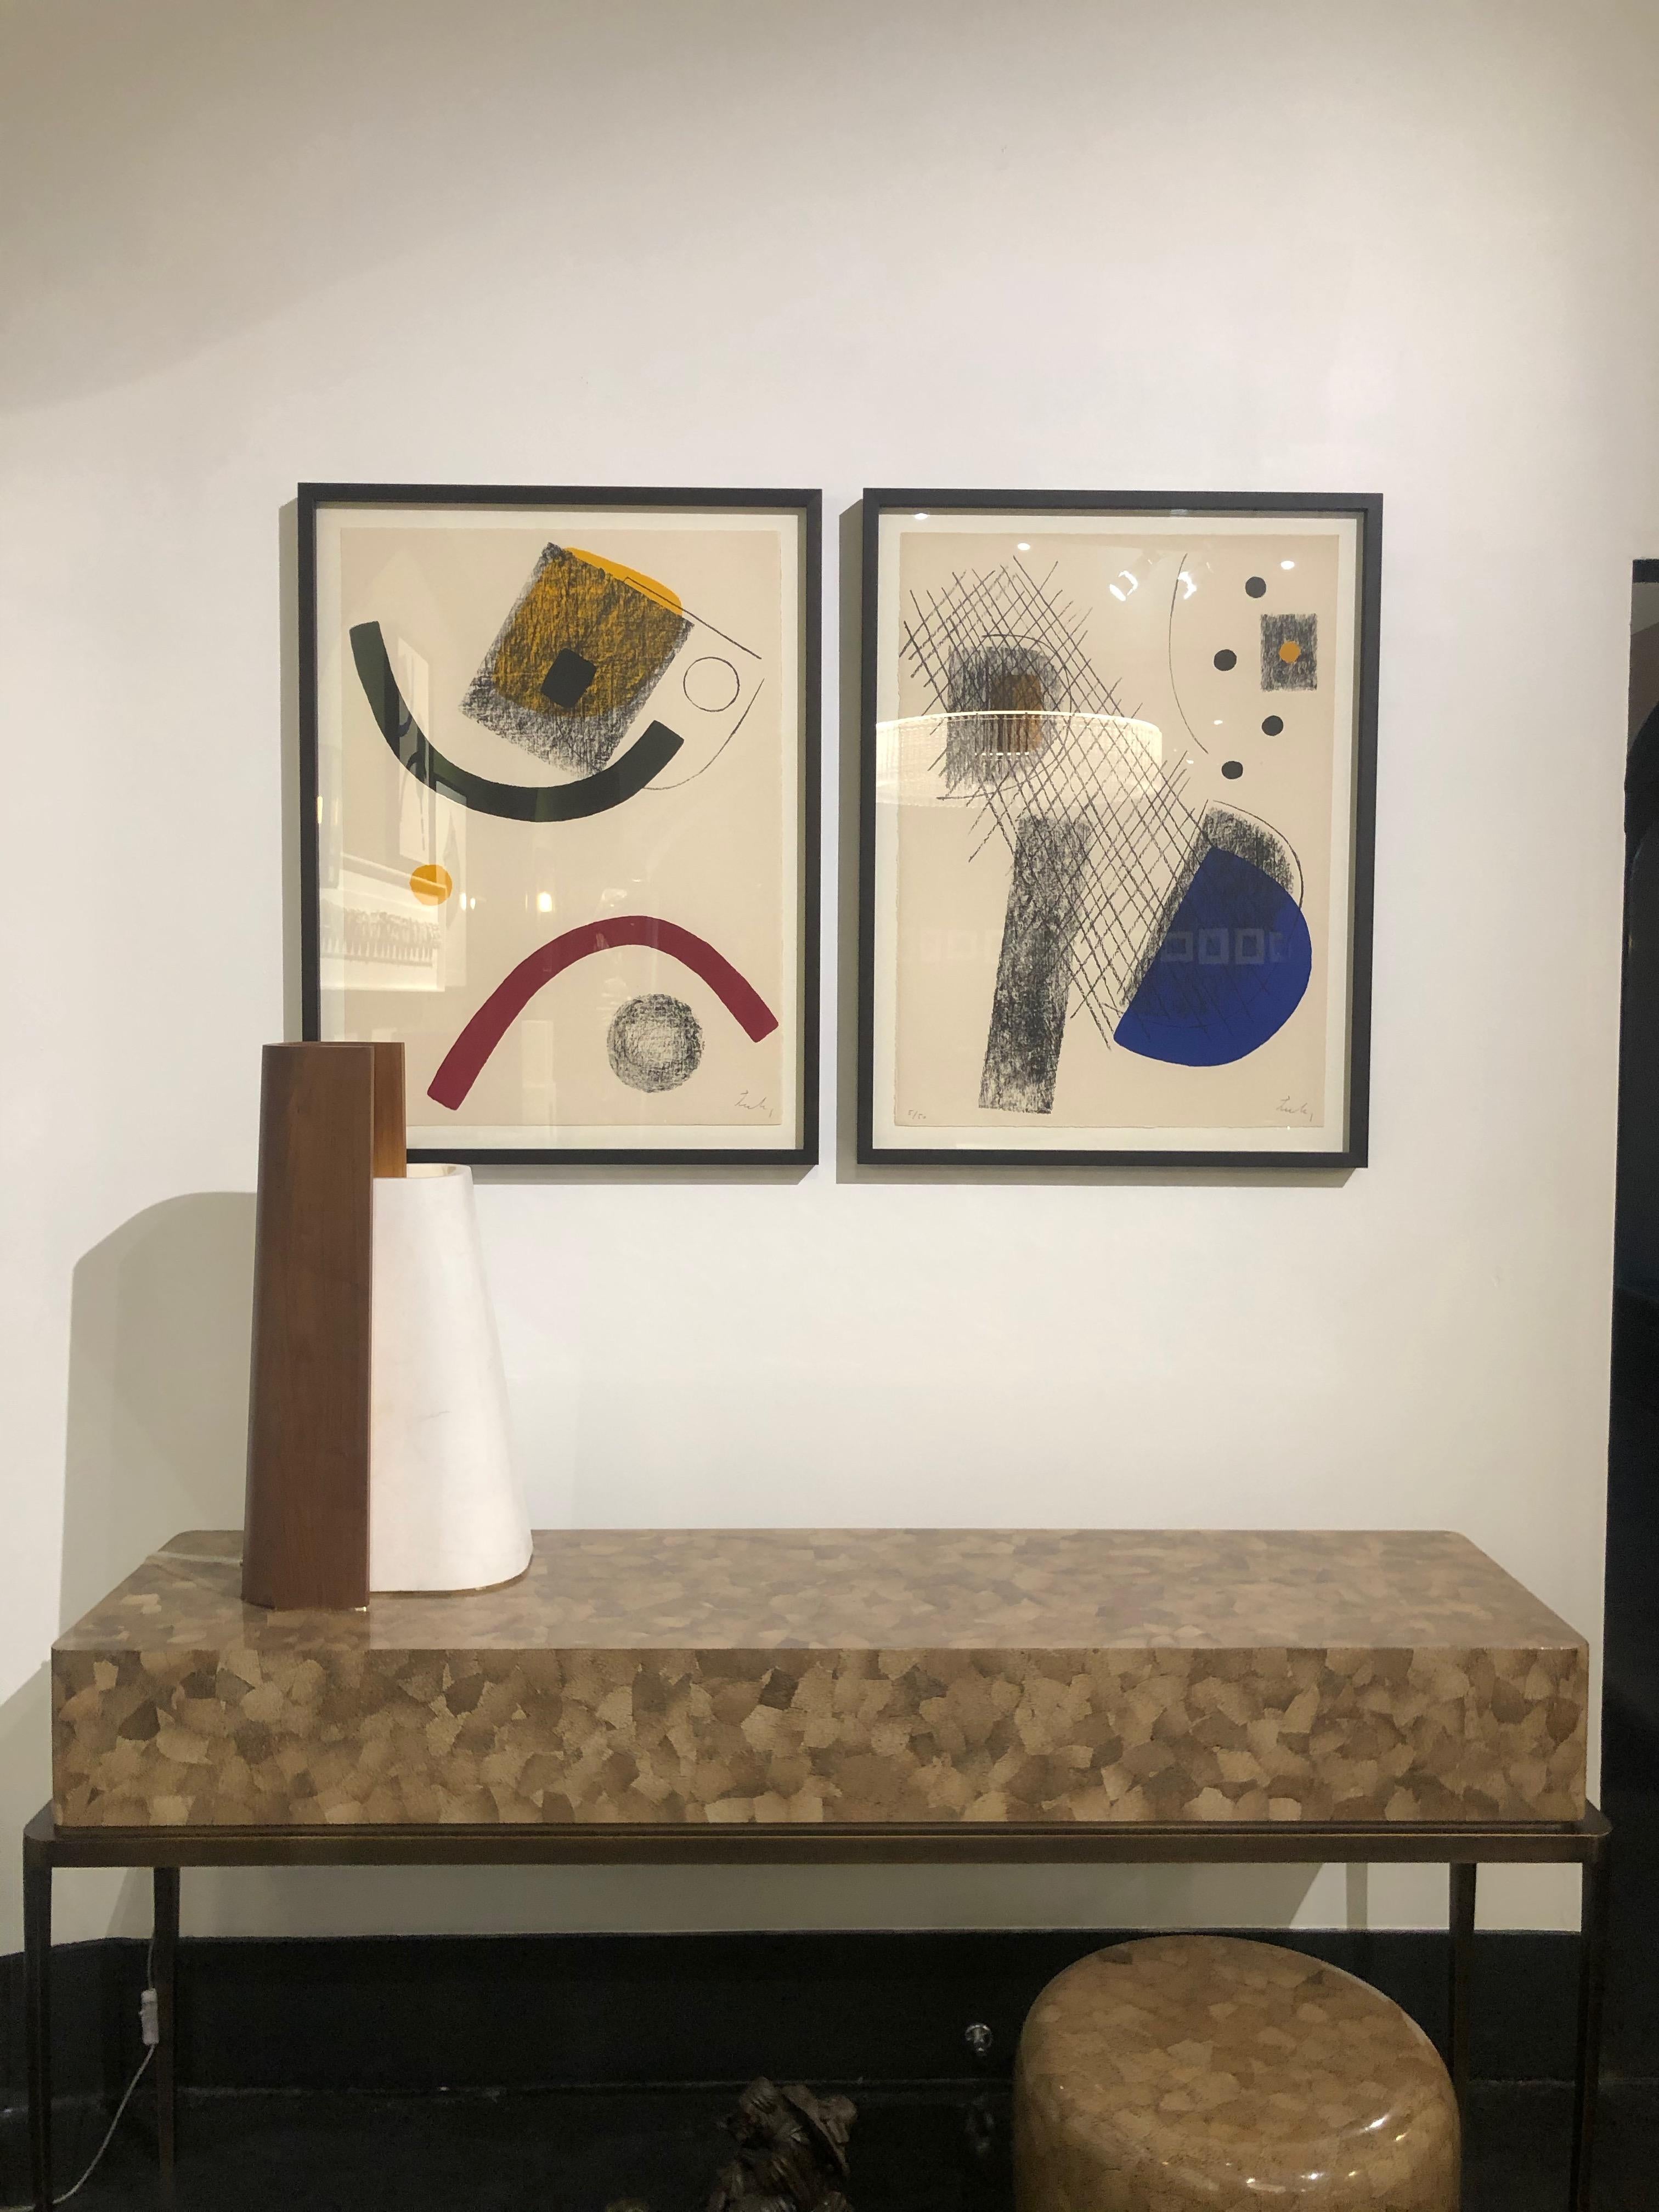 Eggshell Console, JAYA by Reda Amalou, 2018, limited edition of 8, 140 cm For Sale 4